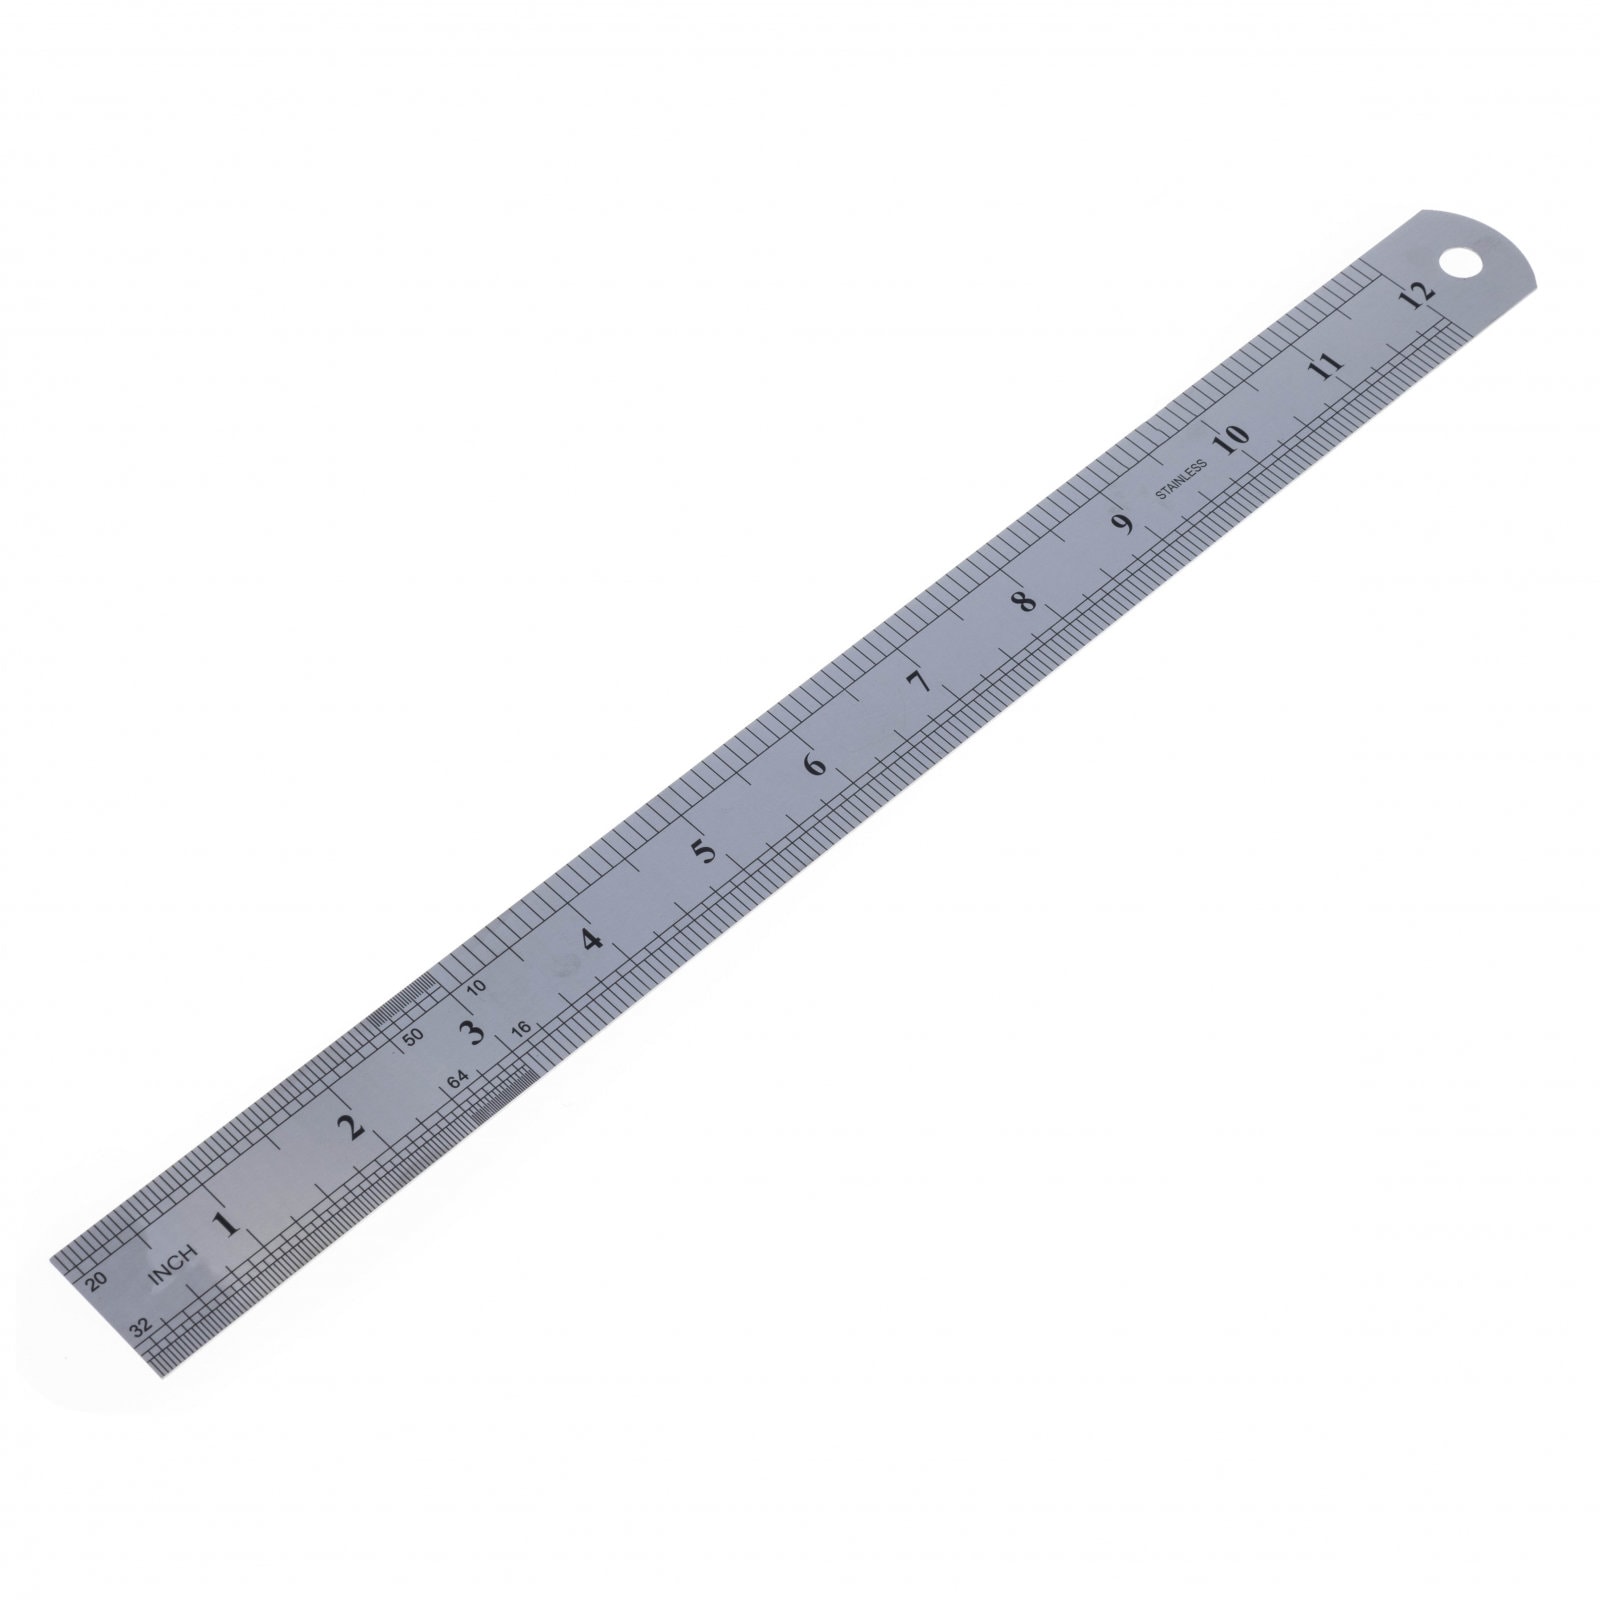 1PC Metric and Imperial Scale Stainless Steel Ruler Double-sided  2/6/8/12/16/20 Inch Metal Rulers with High Precision Graduation Line